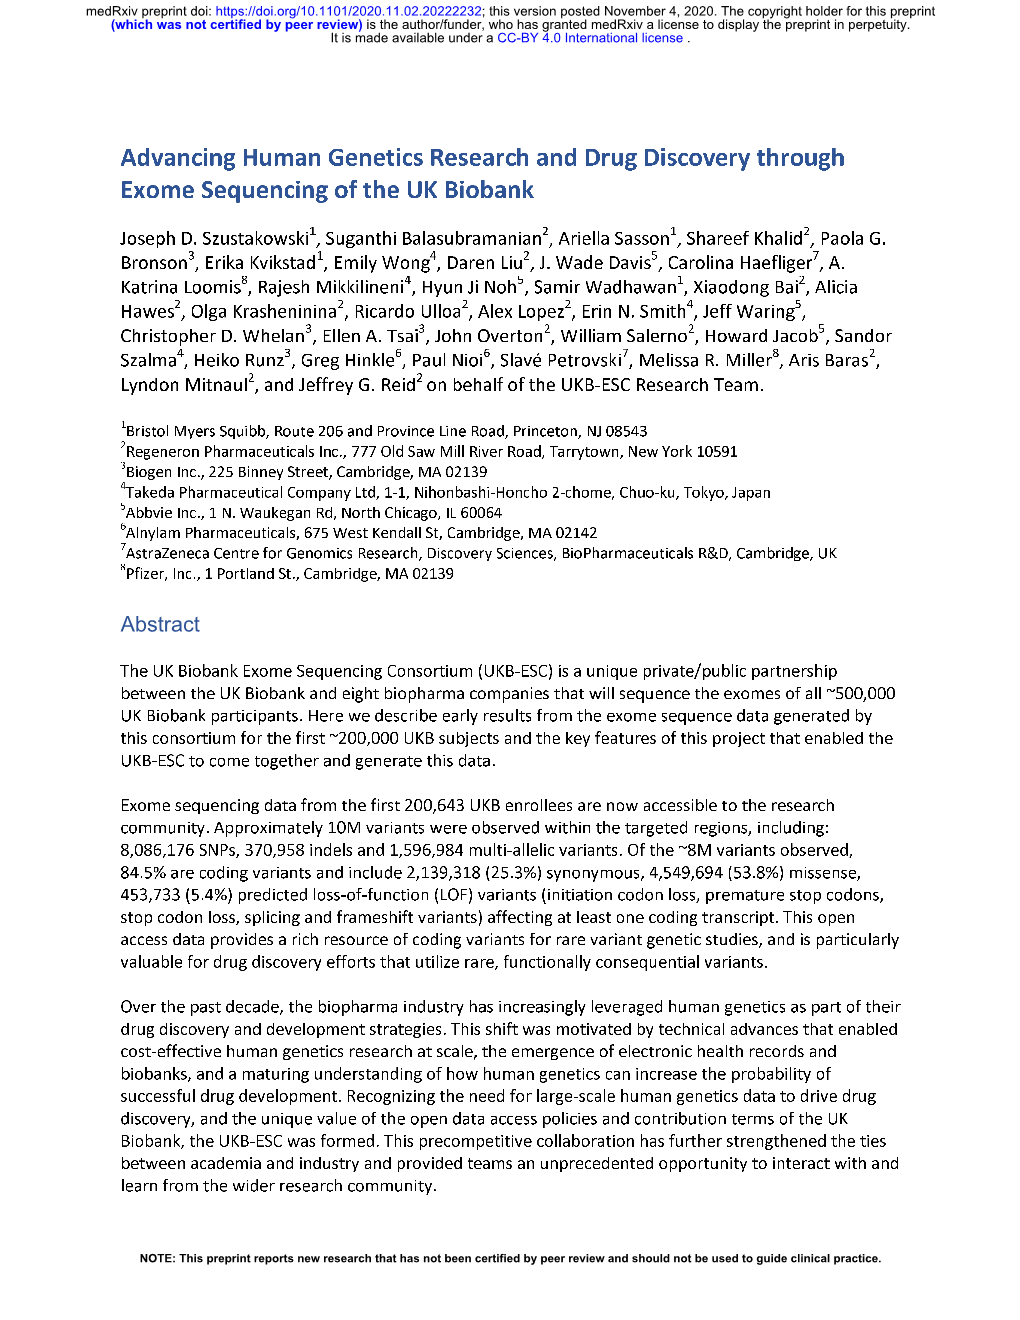 Advancing Human Genetics Research and Drug Discovery Through Exome Sequencing of the UK Biobank